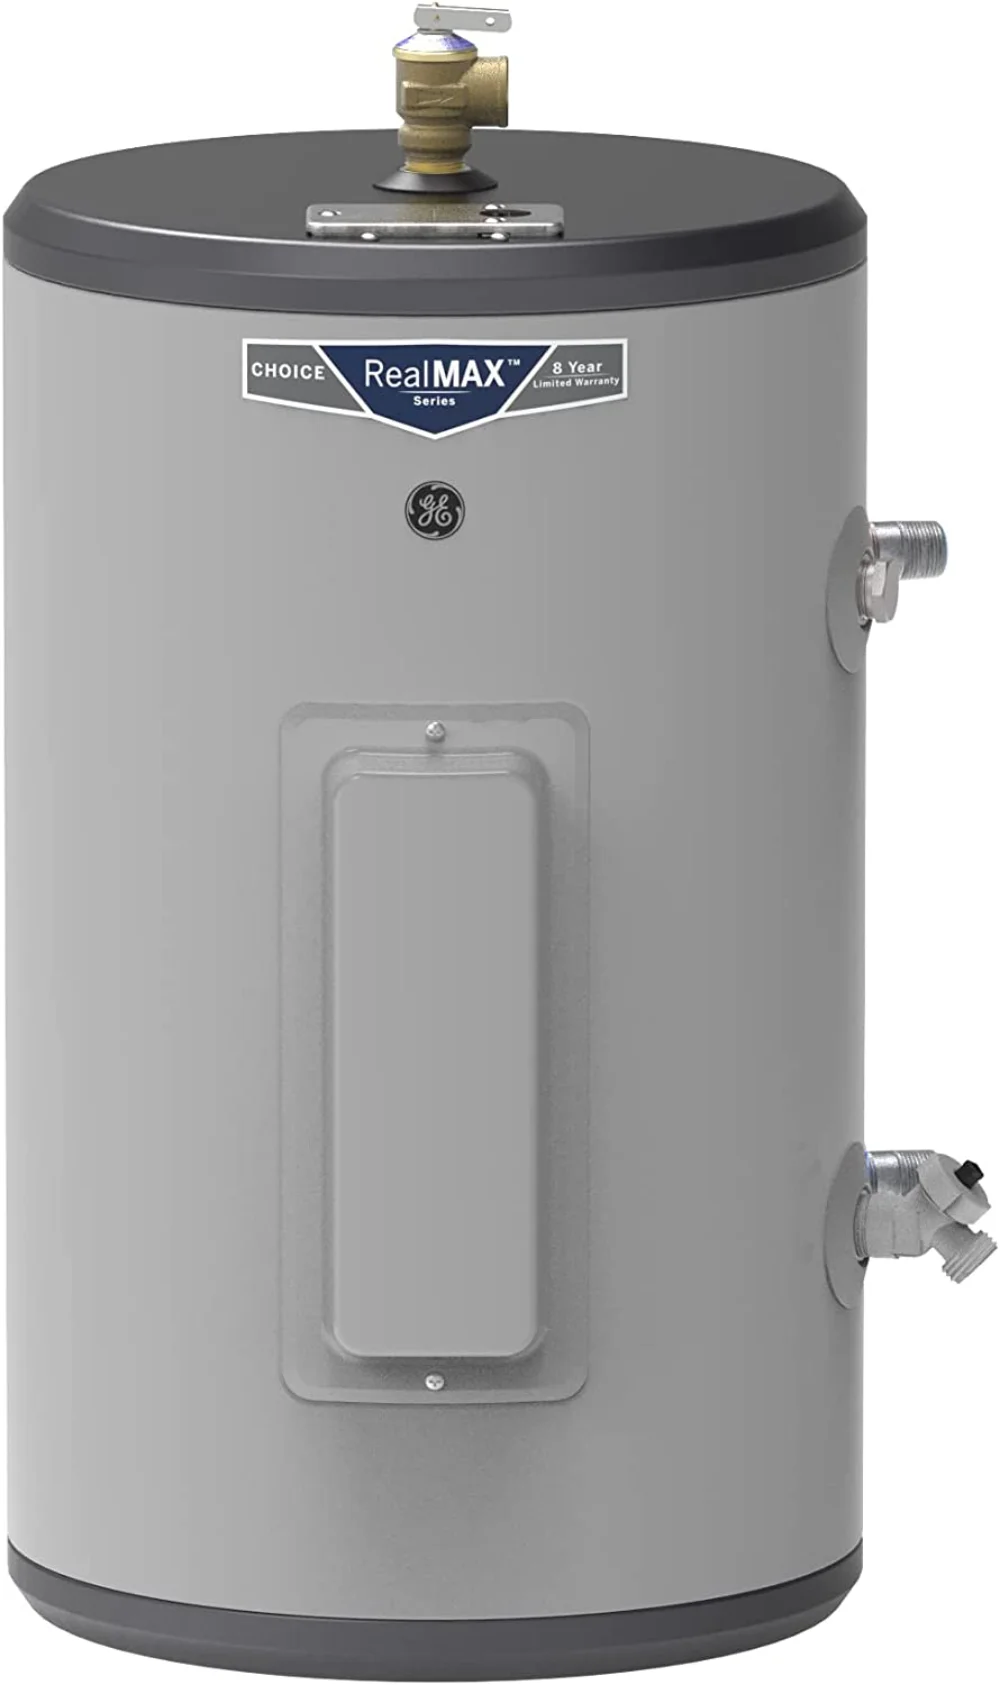 цена GE APPLIANCES Point of Use Water Heaters,Electric Water Heater,Stainless Steel, Gray